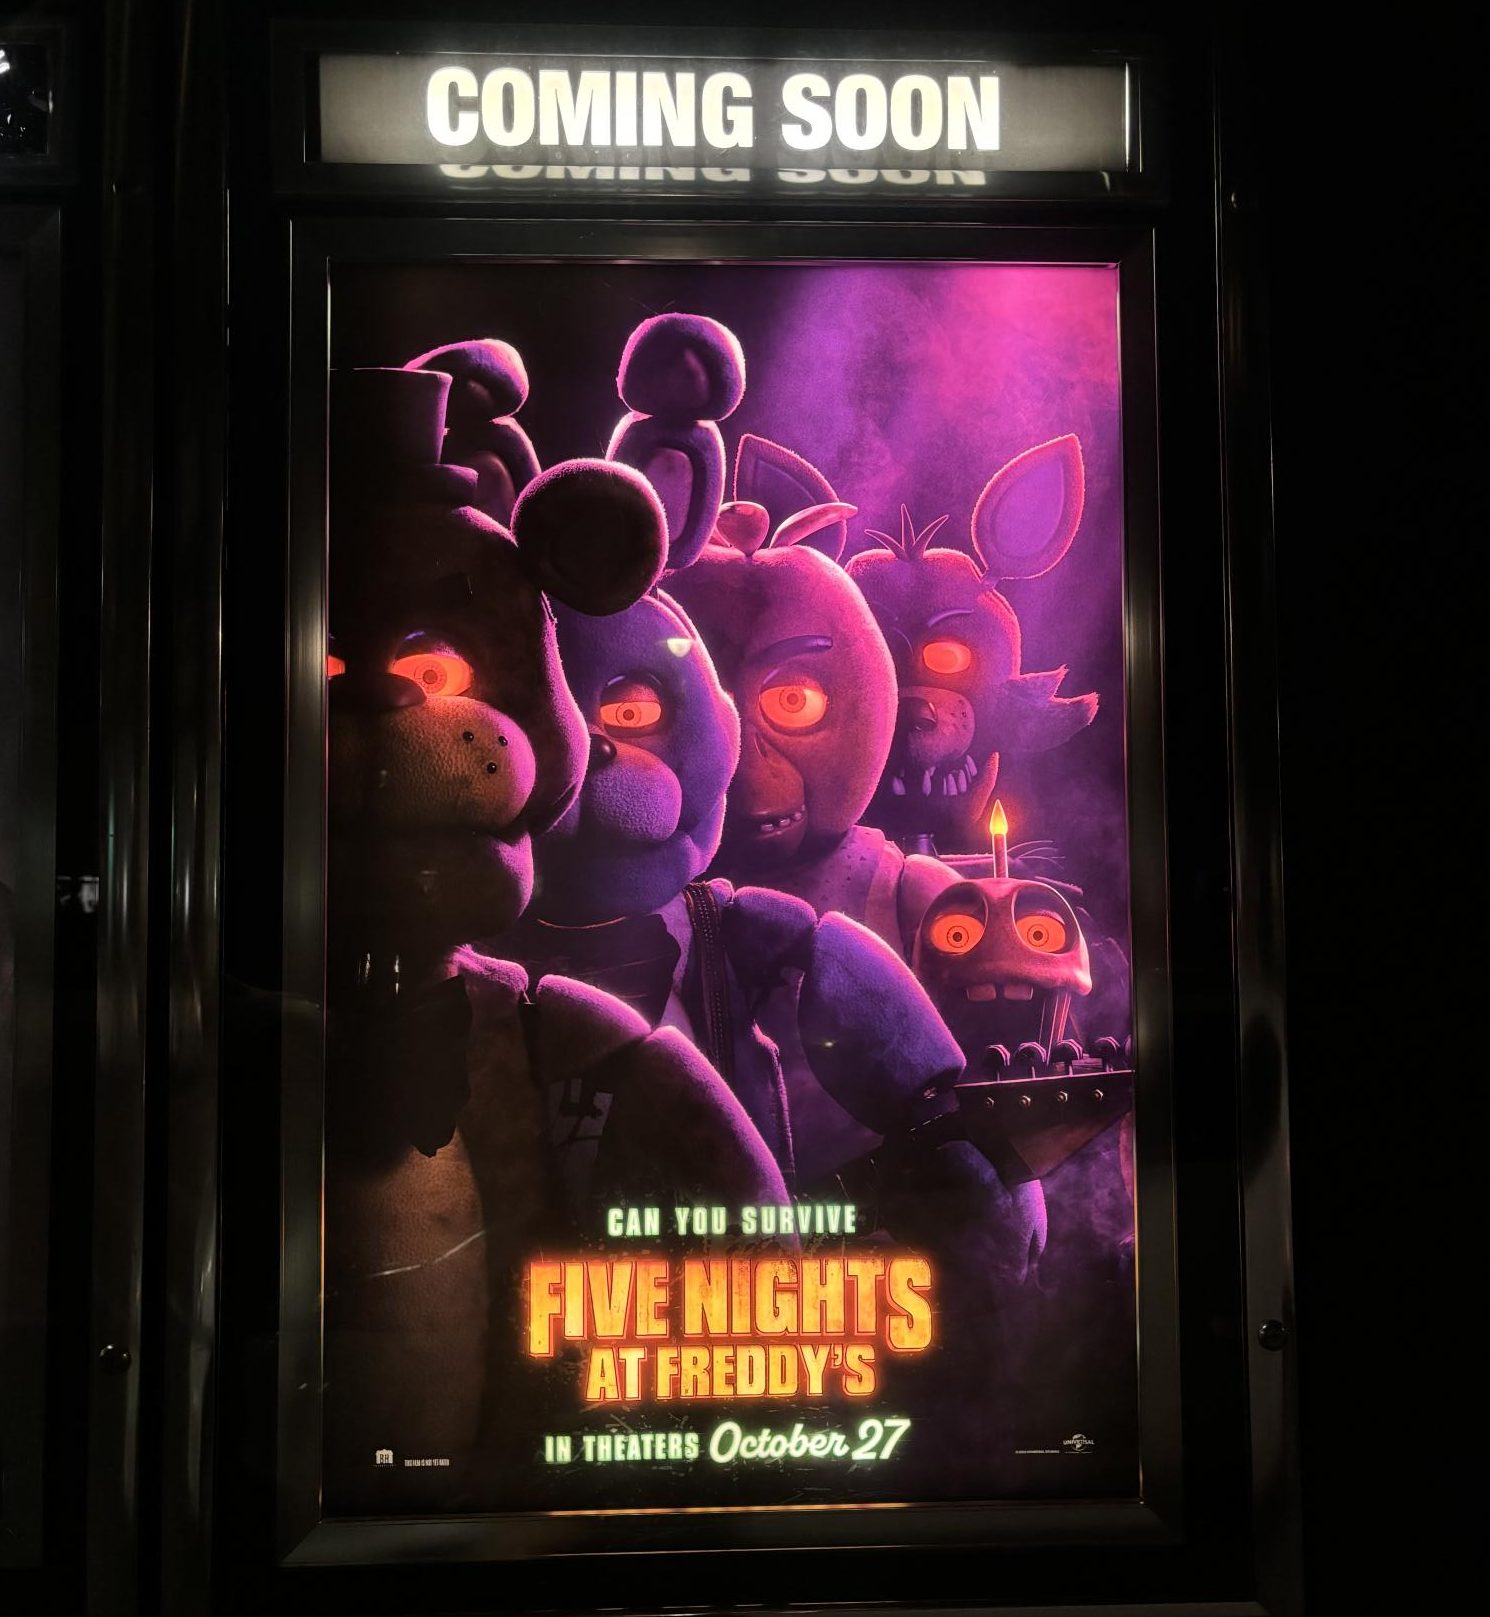 The Five Nights at Freddys Poster (Photo by Angelica Summary)